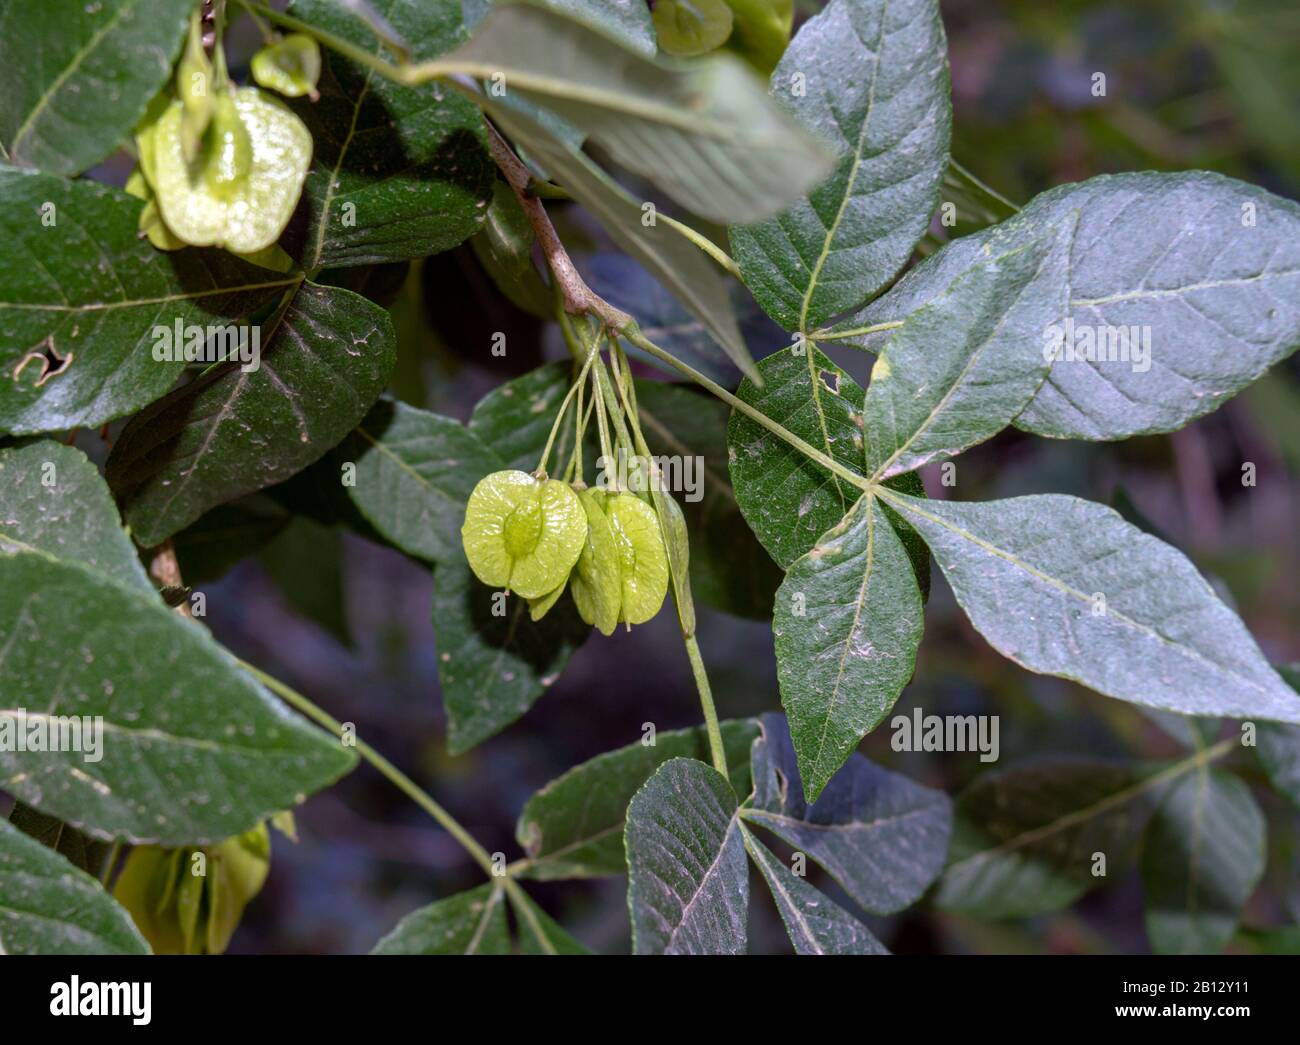 A close up view of wafers on a common hoptree in Colorado with bokeh effect. Stock Photo